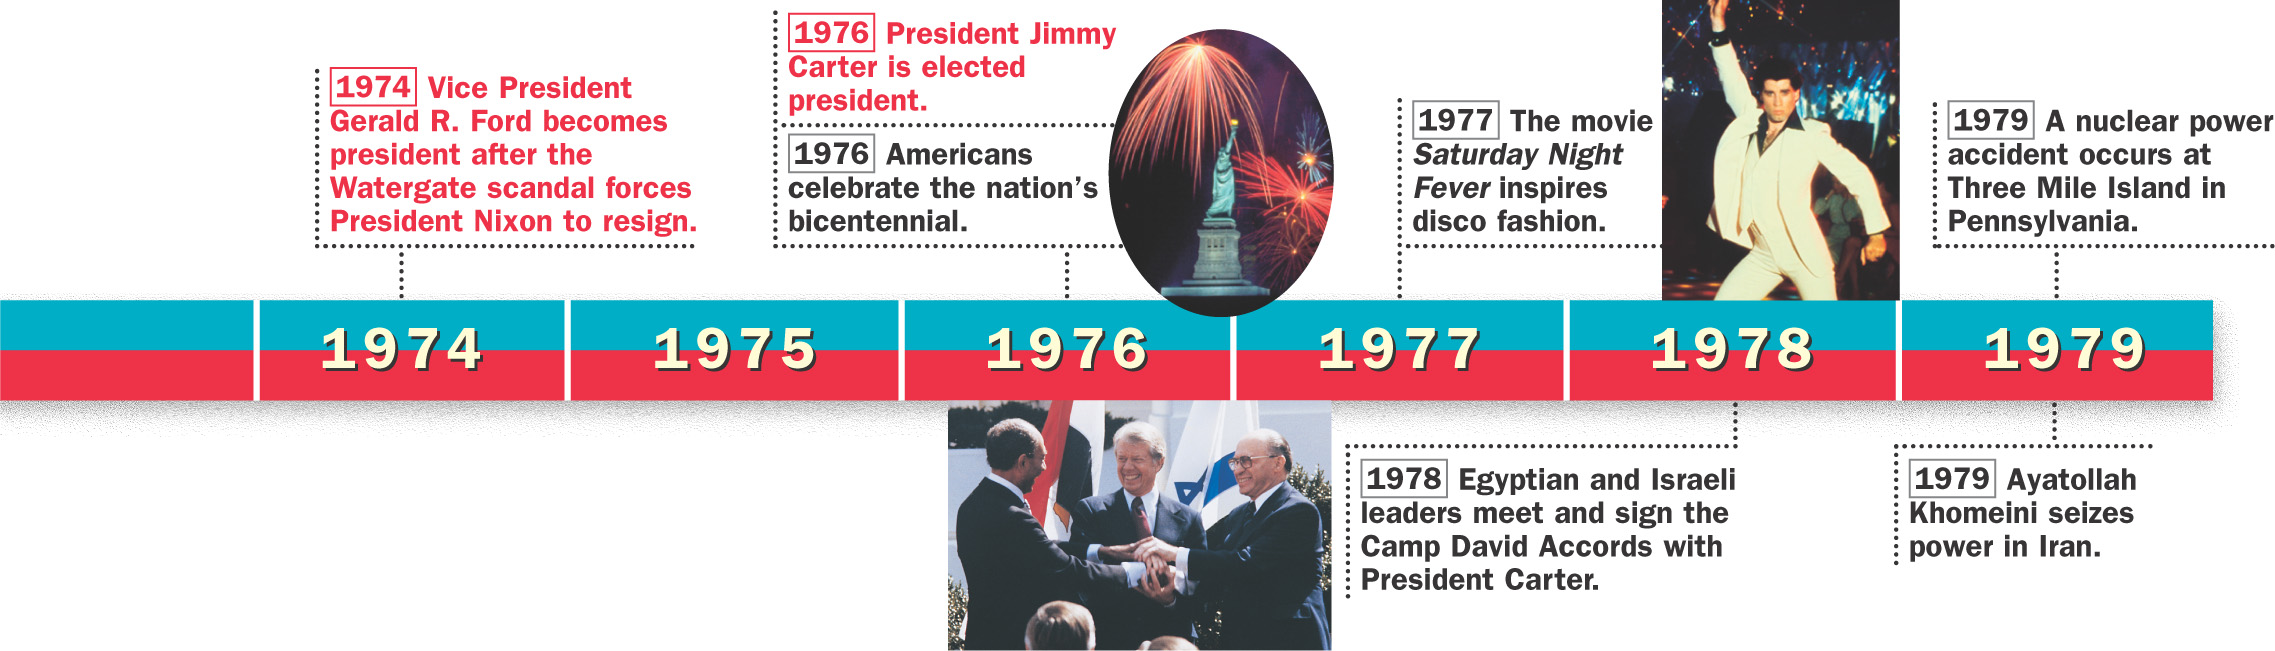 A timeline of historical events from 1968 to 1979 in both the U.S. and the world